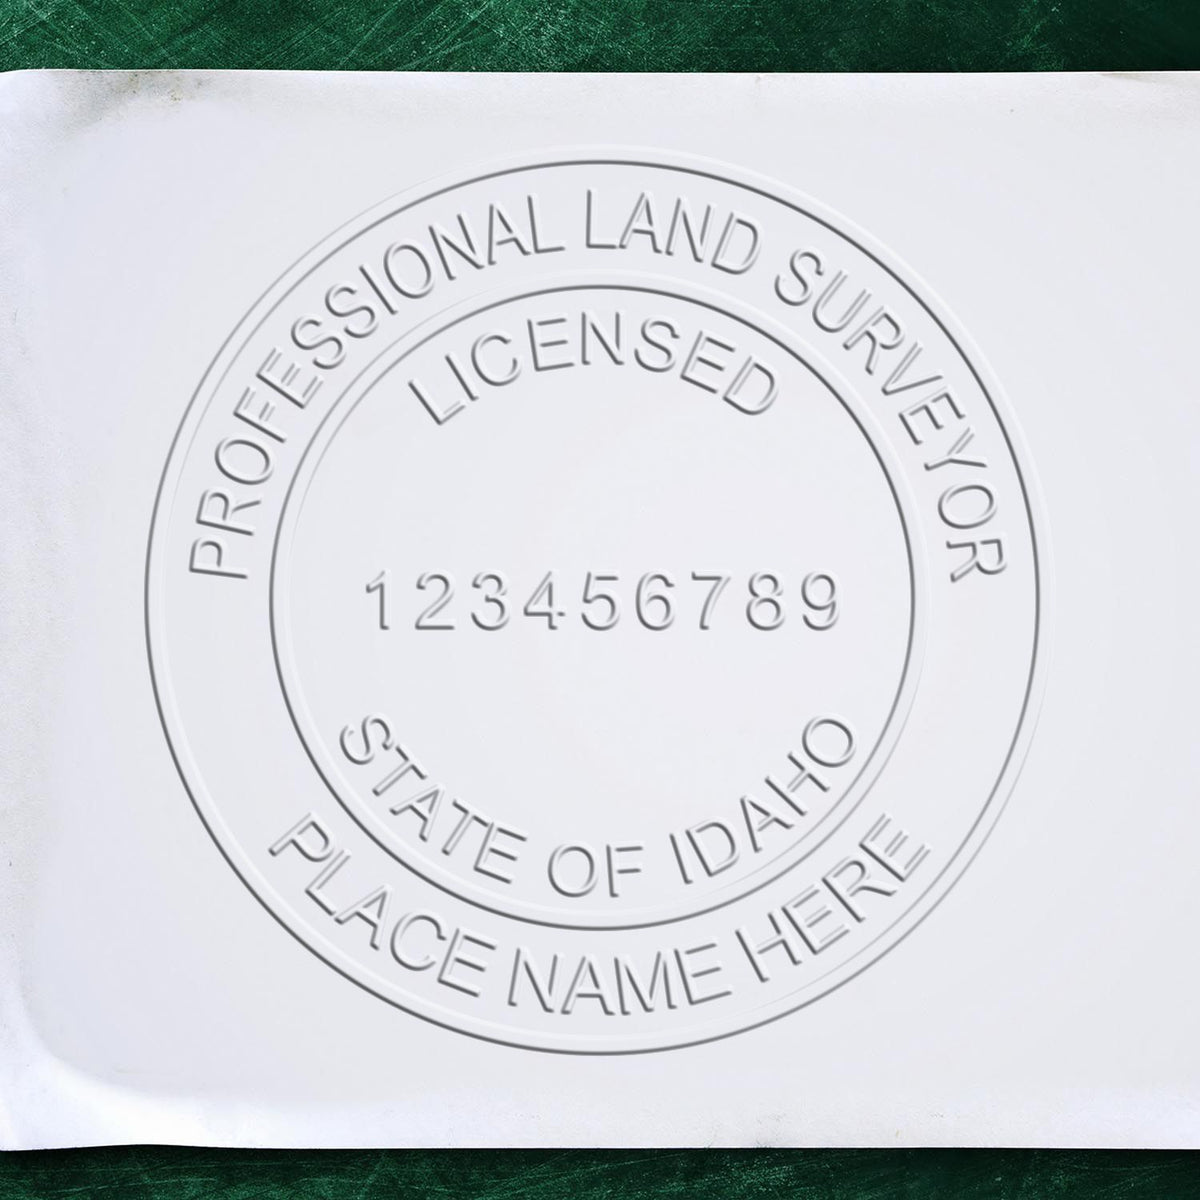 A photograph of the State of Idaho Soft Land Surveyor Embossing Seal stamp impression reveals a vivid, professional image of the on paper.